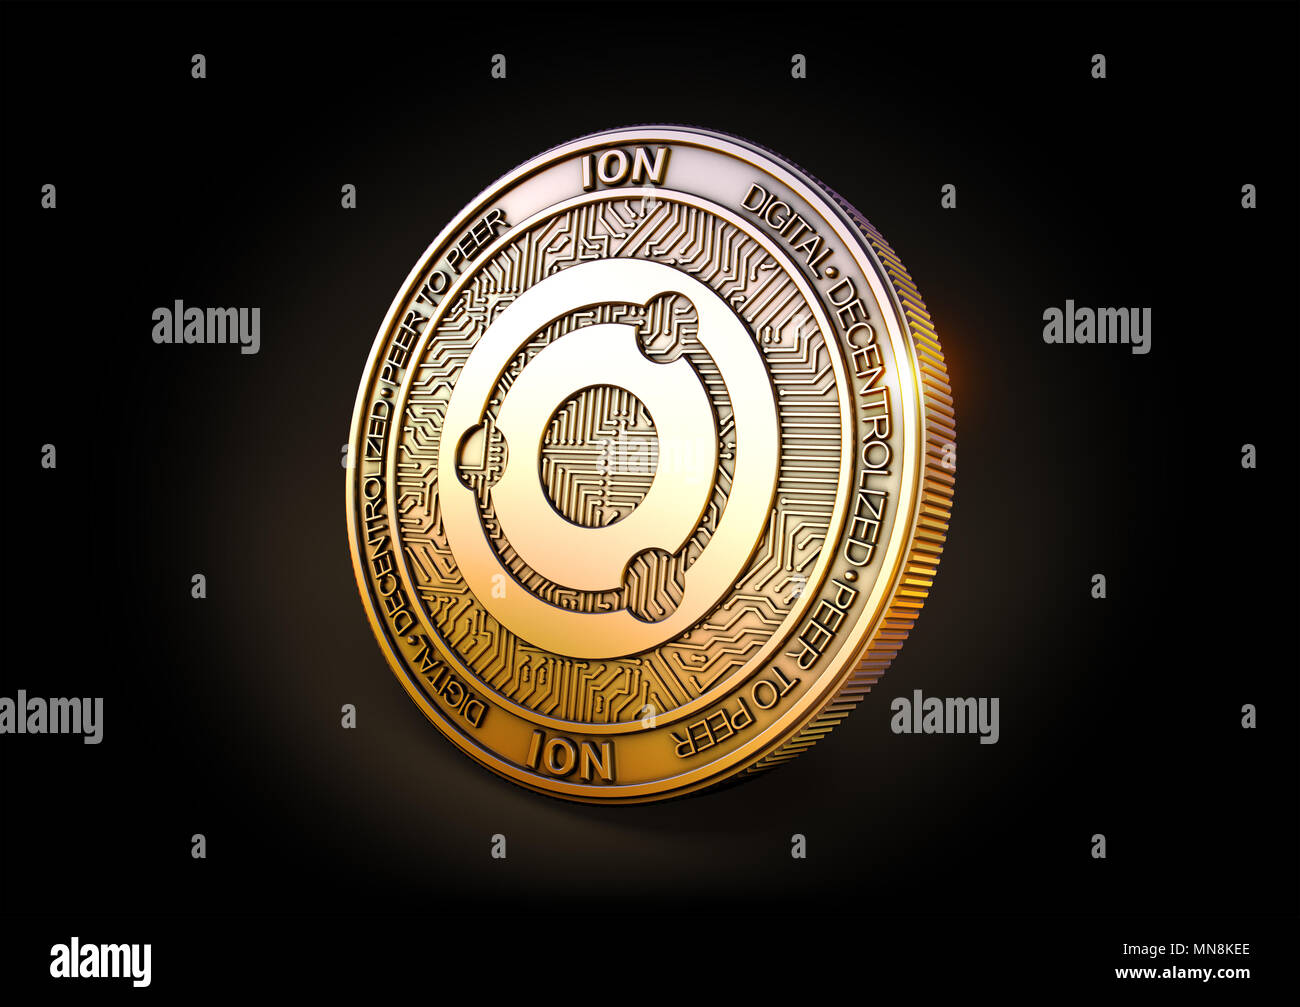 Ion - Cryptocurrency Coin. 3D rendering Stock Photo